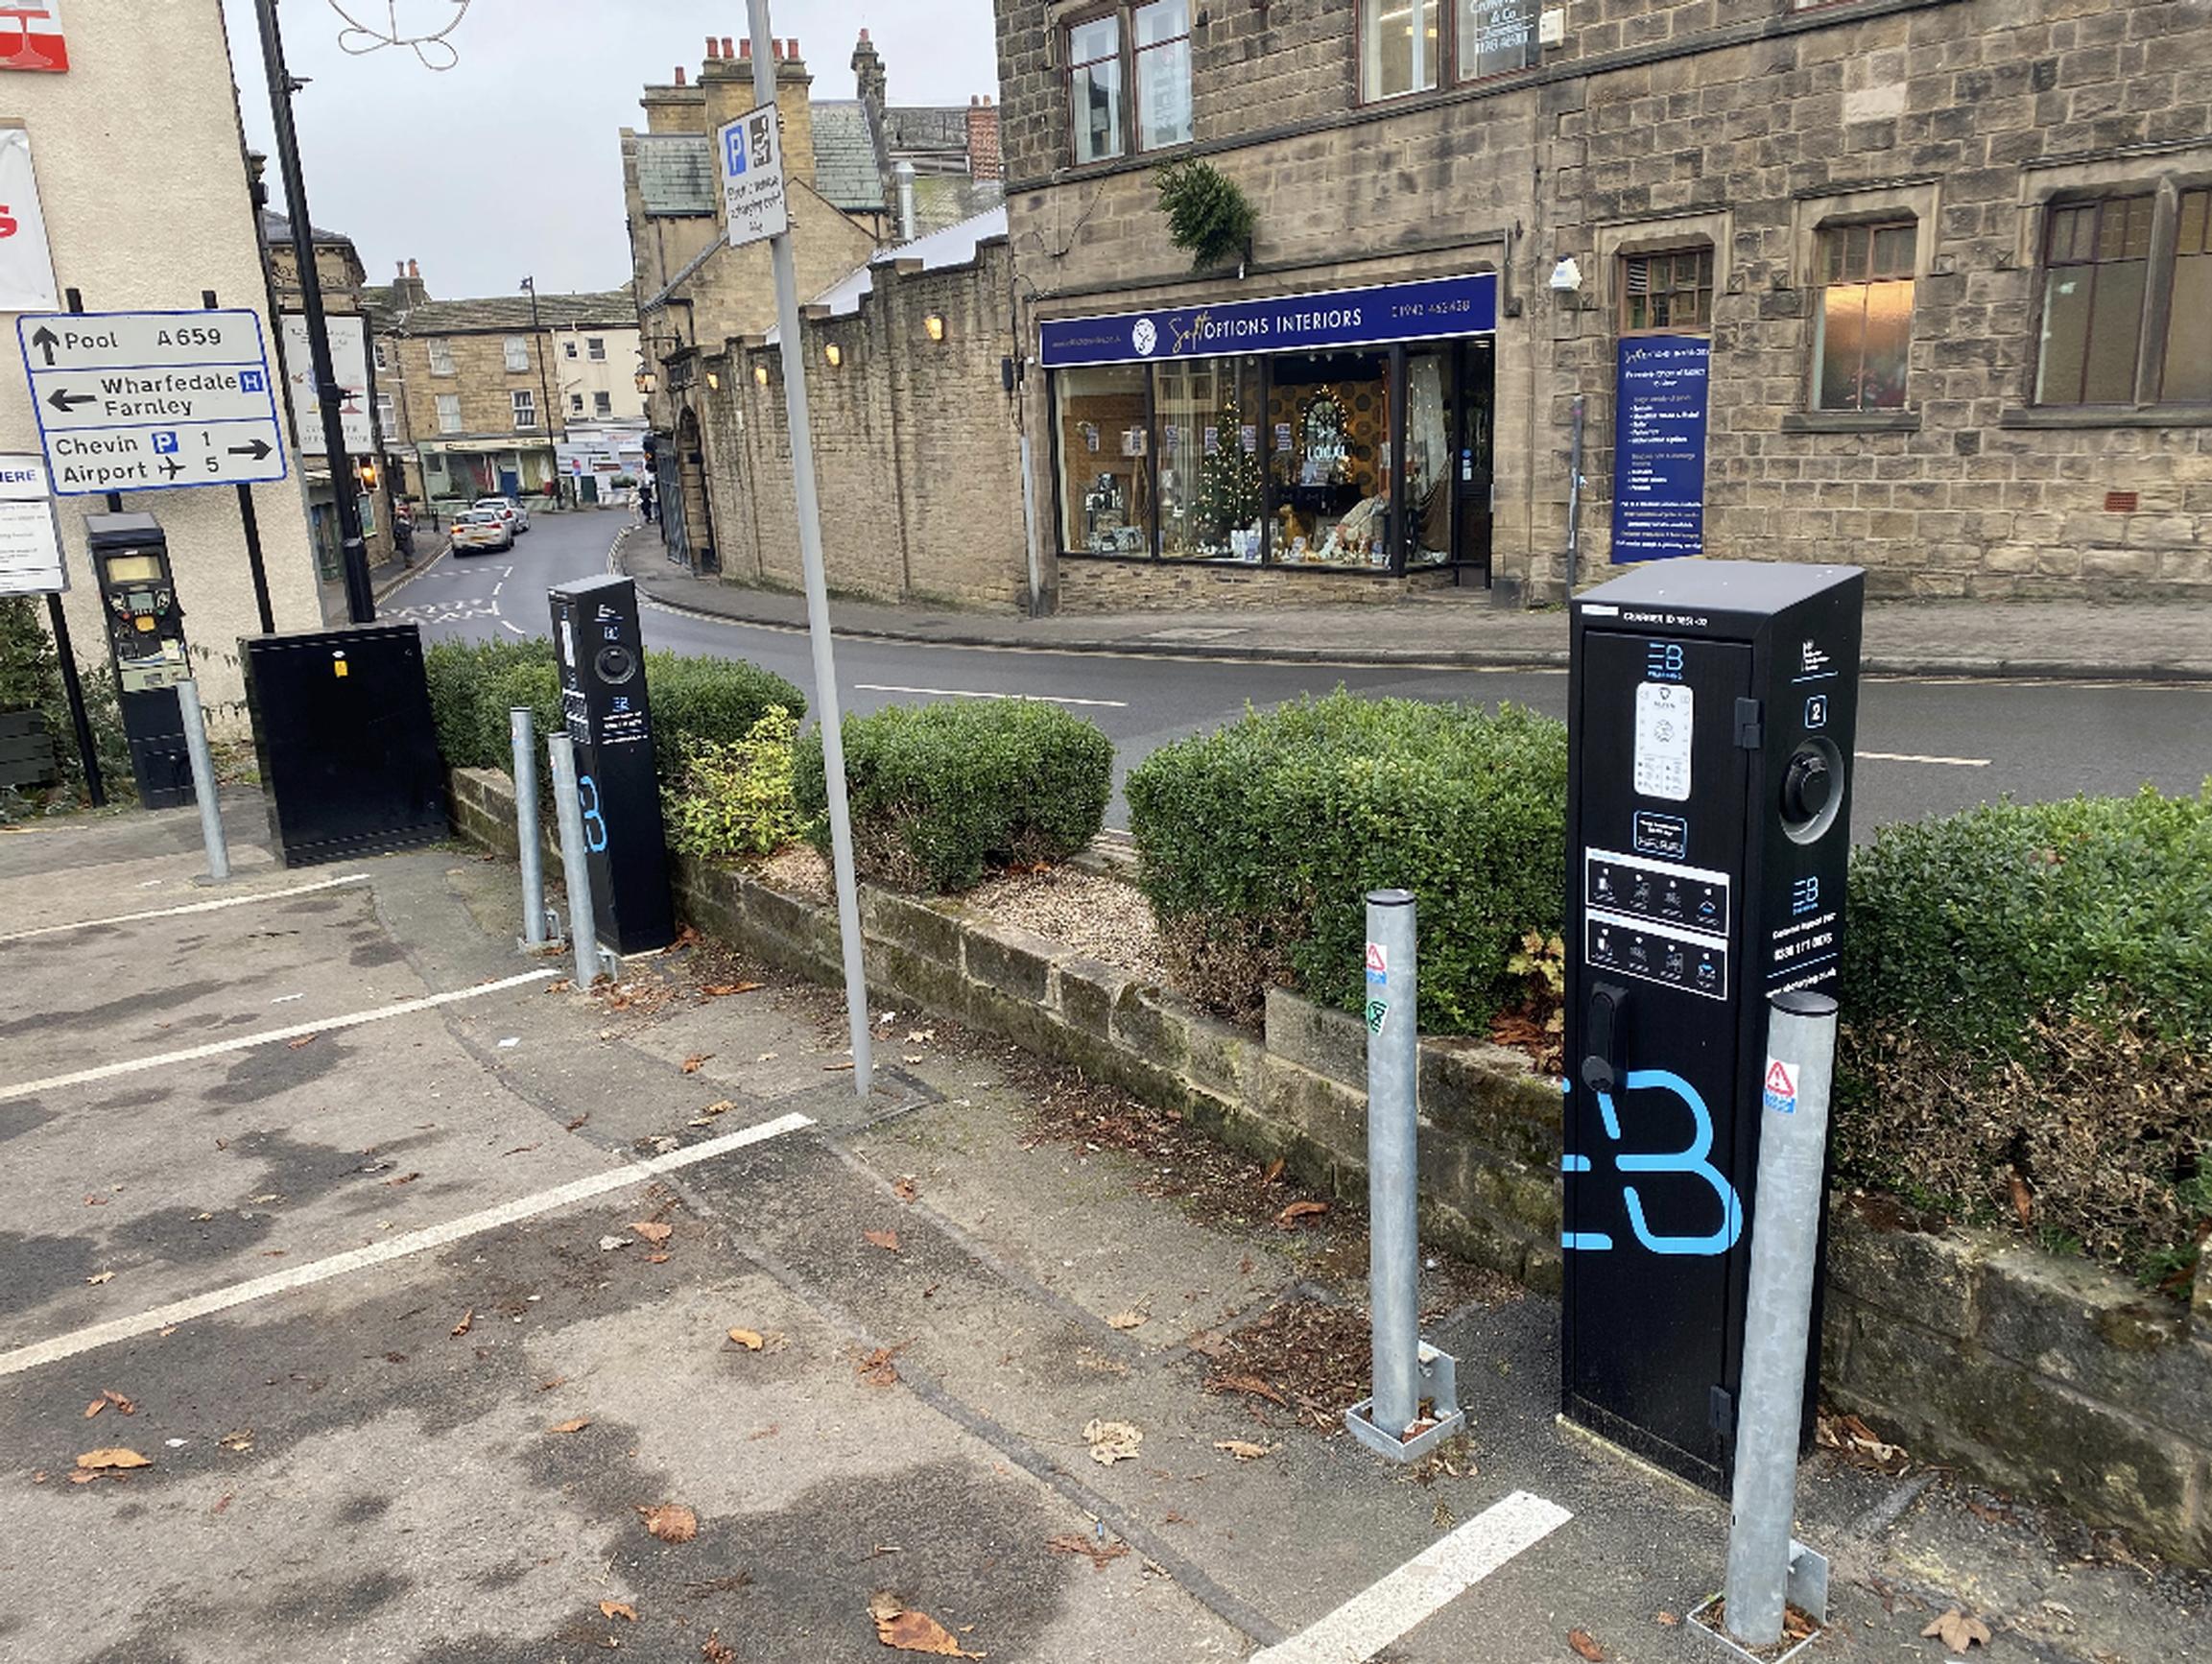 Chargepoints in the Beech Hill car park